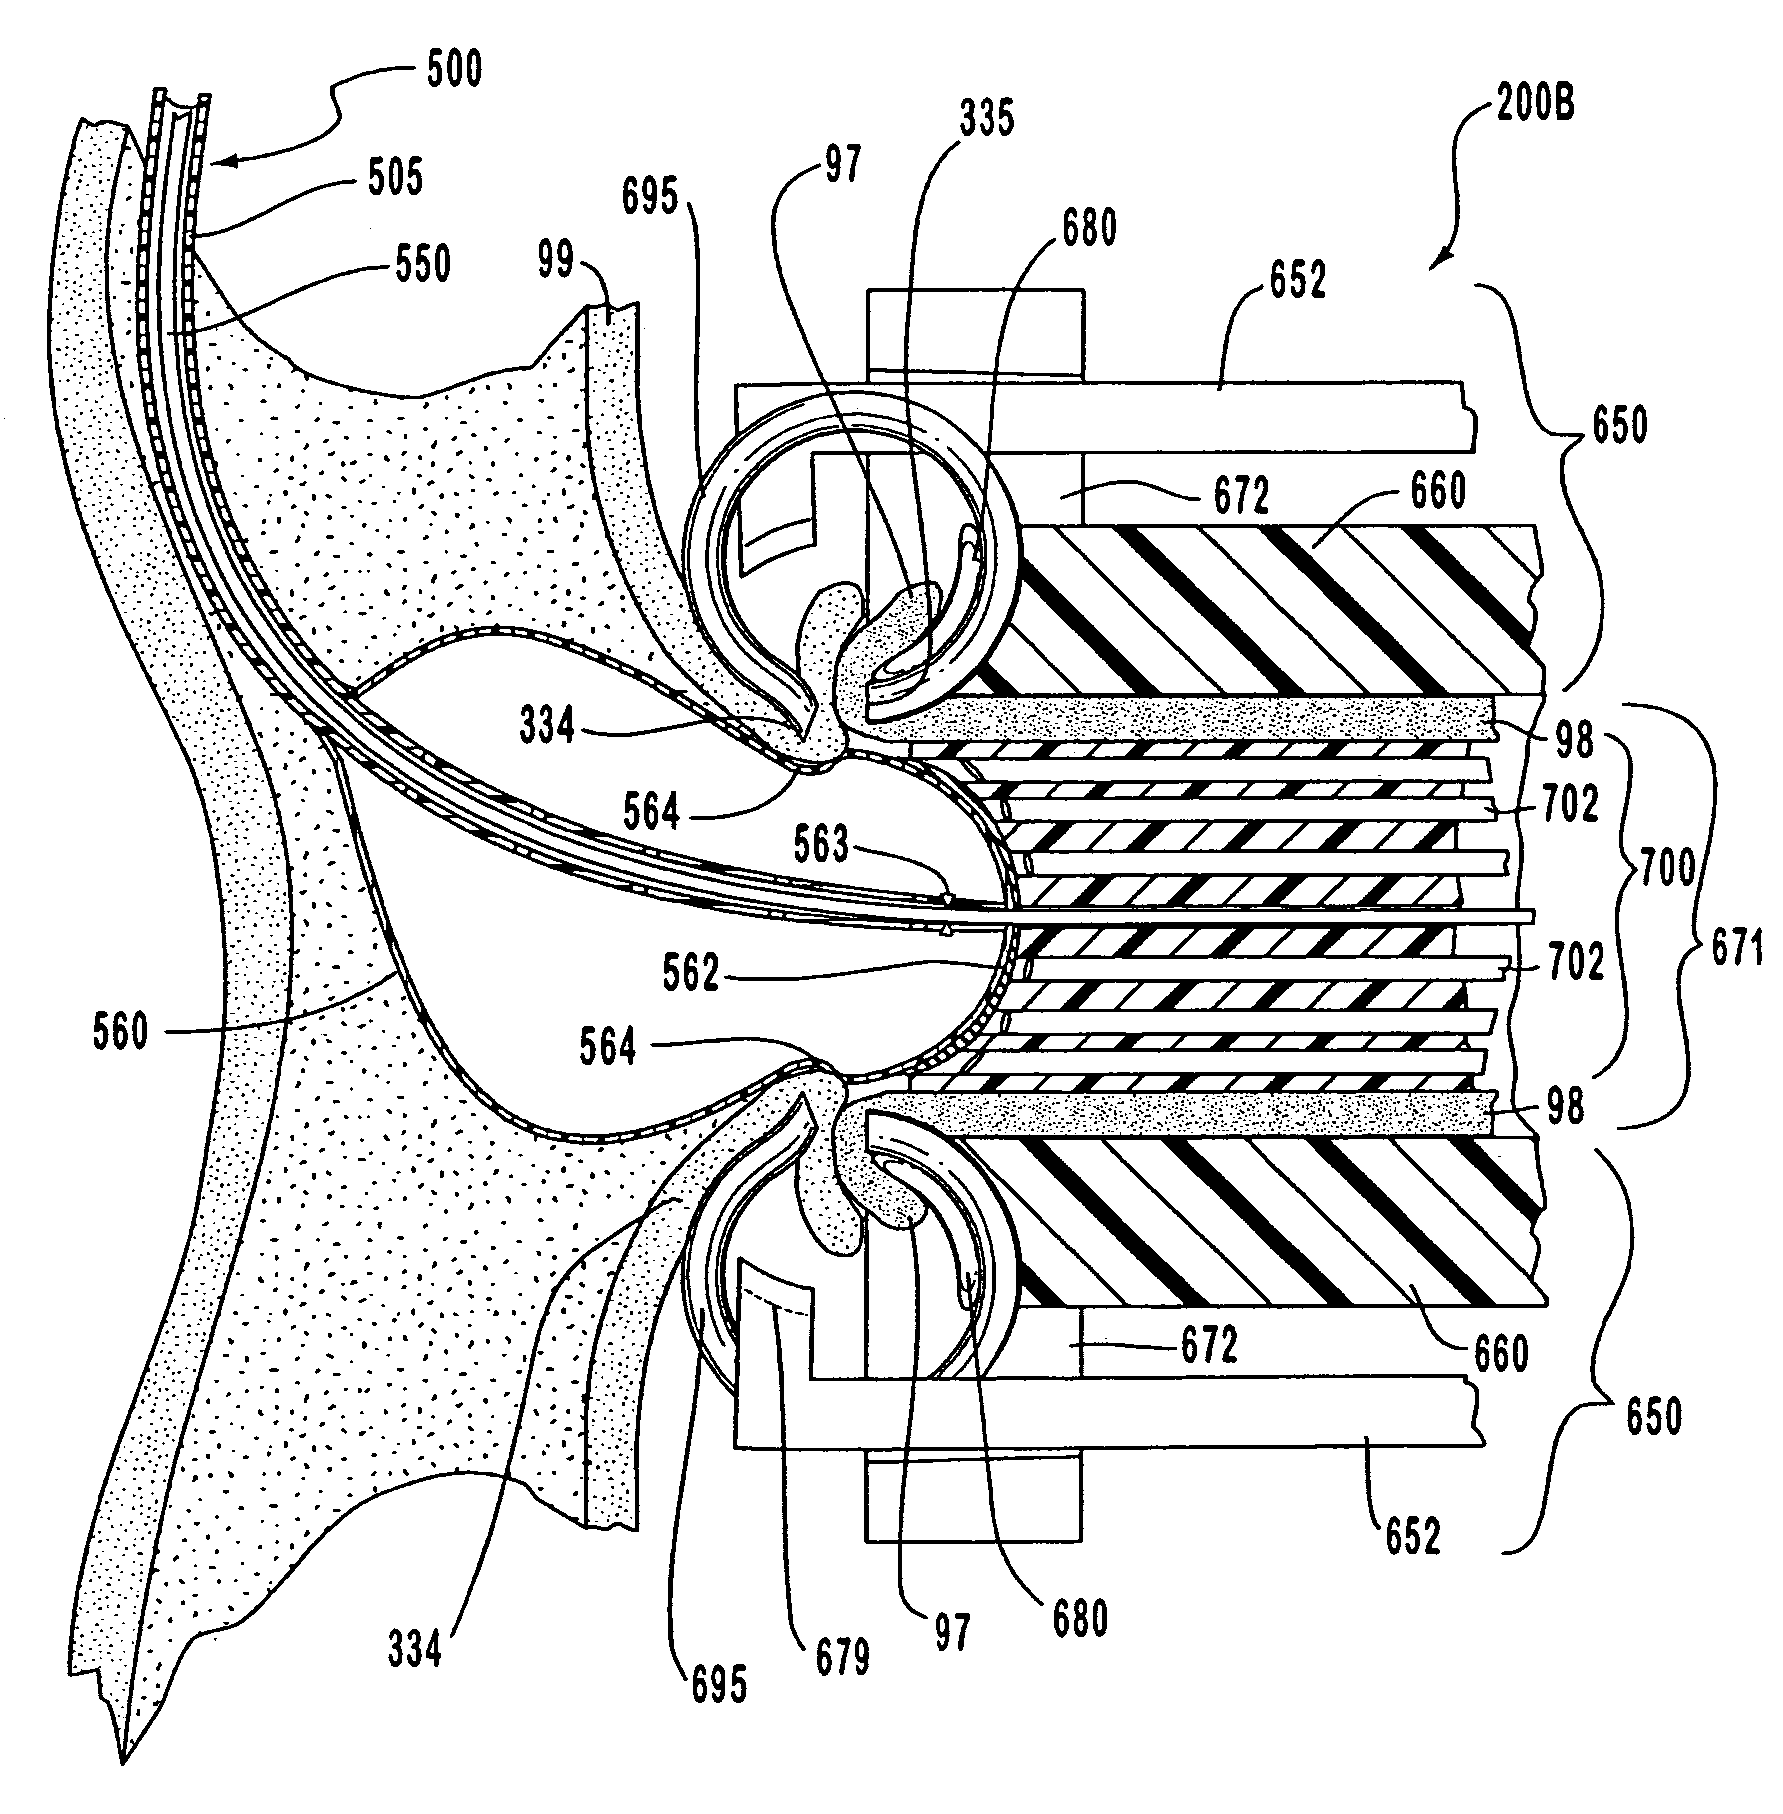 Methods for anastomosis of a graft vessel to a side of a receiving vessel